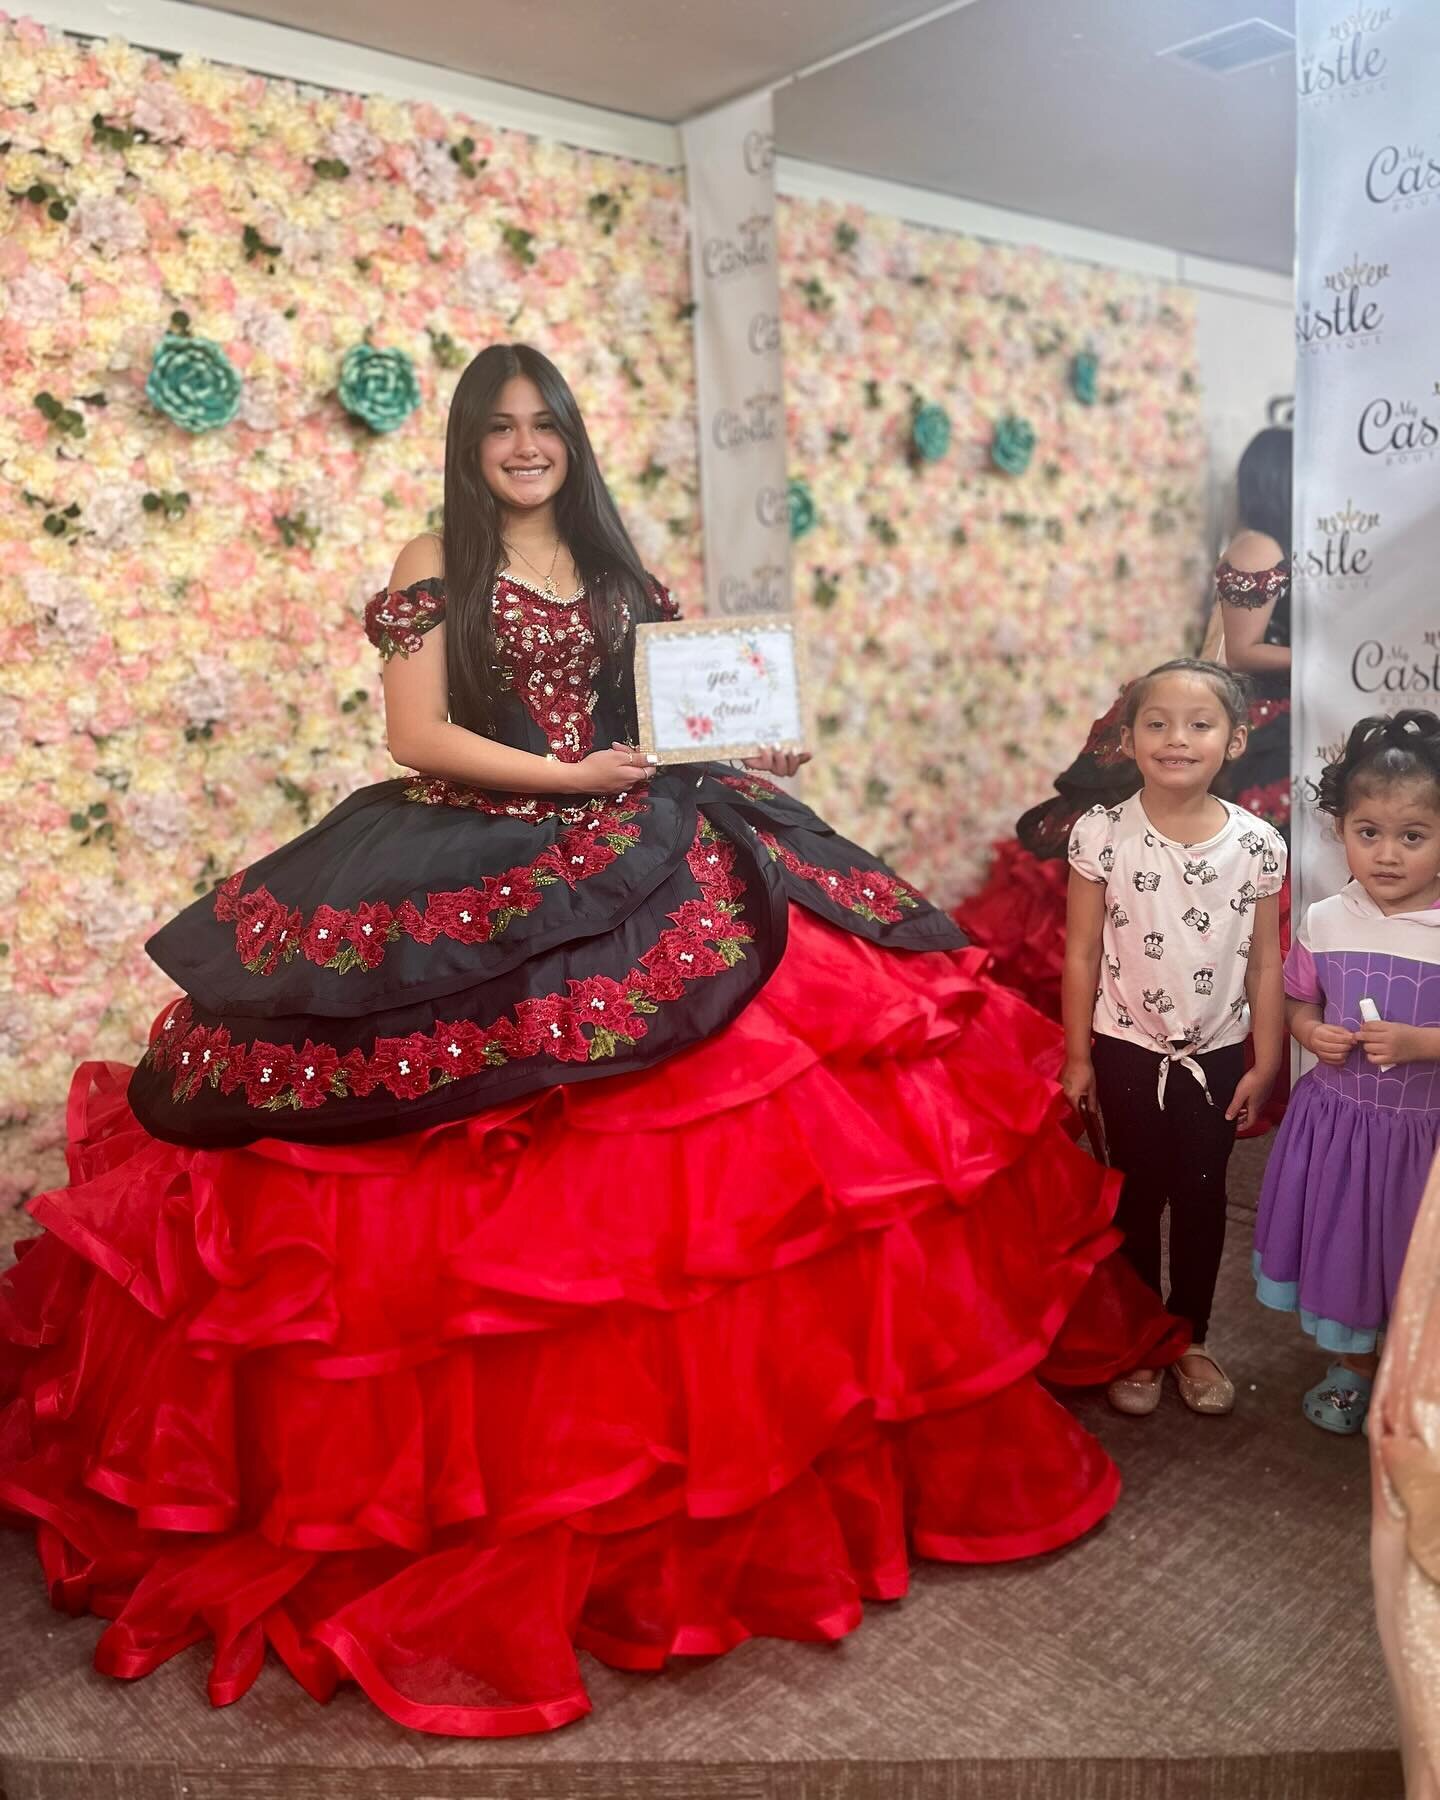 She said yes to the dress! ❤️🖤 Thank you Ms. @arriolaxoxo for allowing us to offer the dream dress! We hope you love it 🥰 
✨
✨✨
✨✨✨
✨✨✨✨
✨✨✨✨✨
✨✨✨✨
✨✨✨
✨✨
✨
#mycastleboutique #pearland #pearlandtx #quincea&ntilde;era #quinceanera #quince #ballgown 